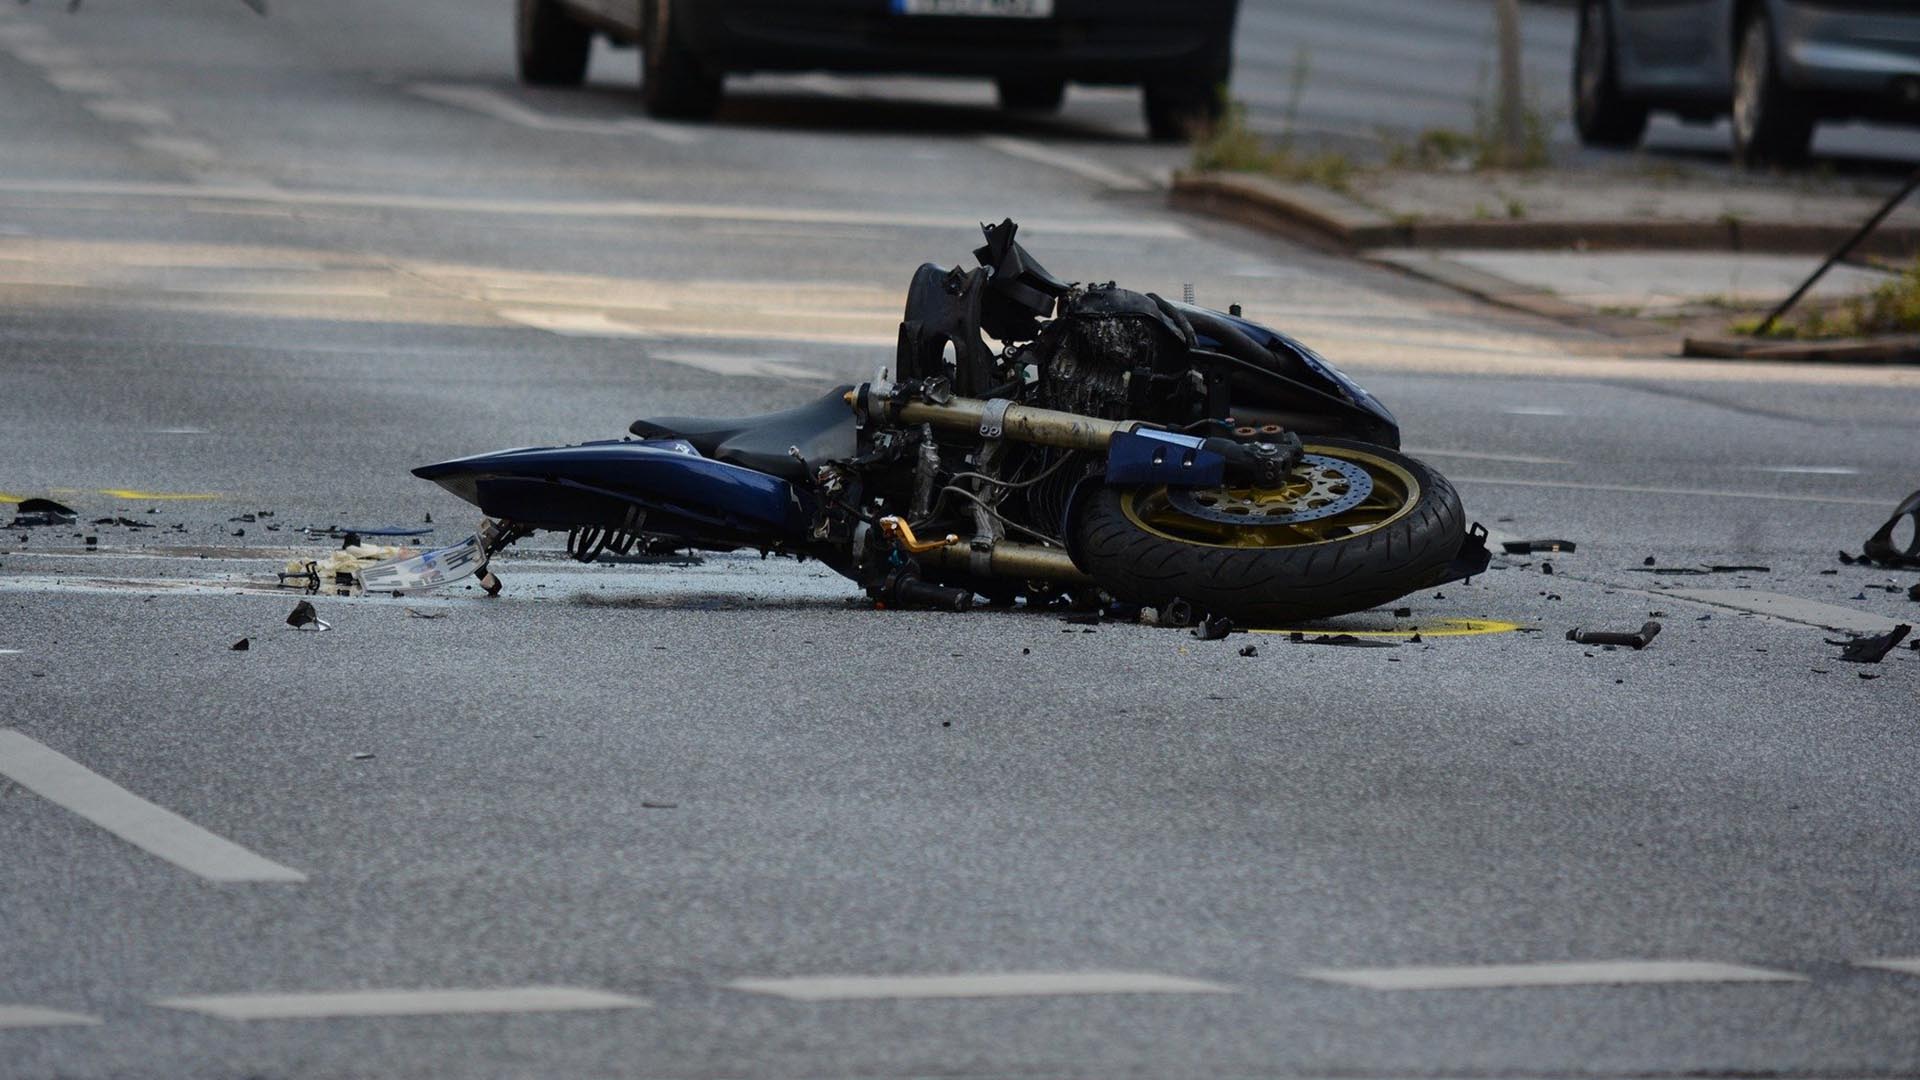 wrecked motorcycle on road